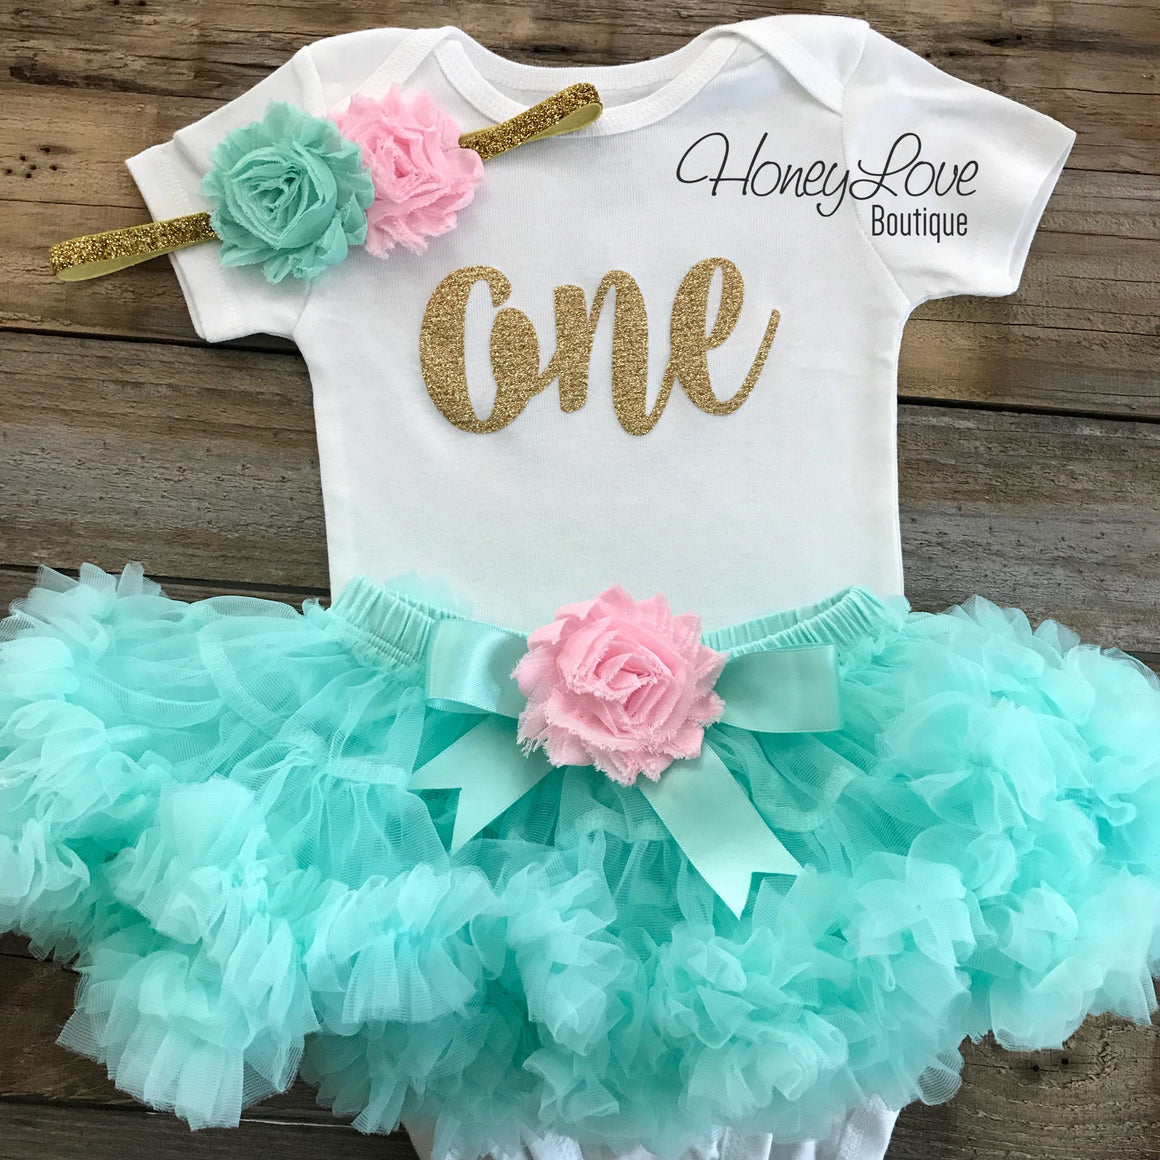 One - Birthday Outfit - Mint/Aqua, Light Pink and Silver/Gold glitter - HoneyLoveBoutique